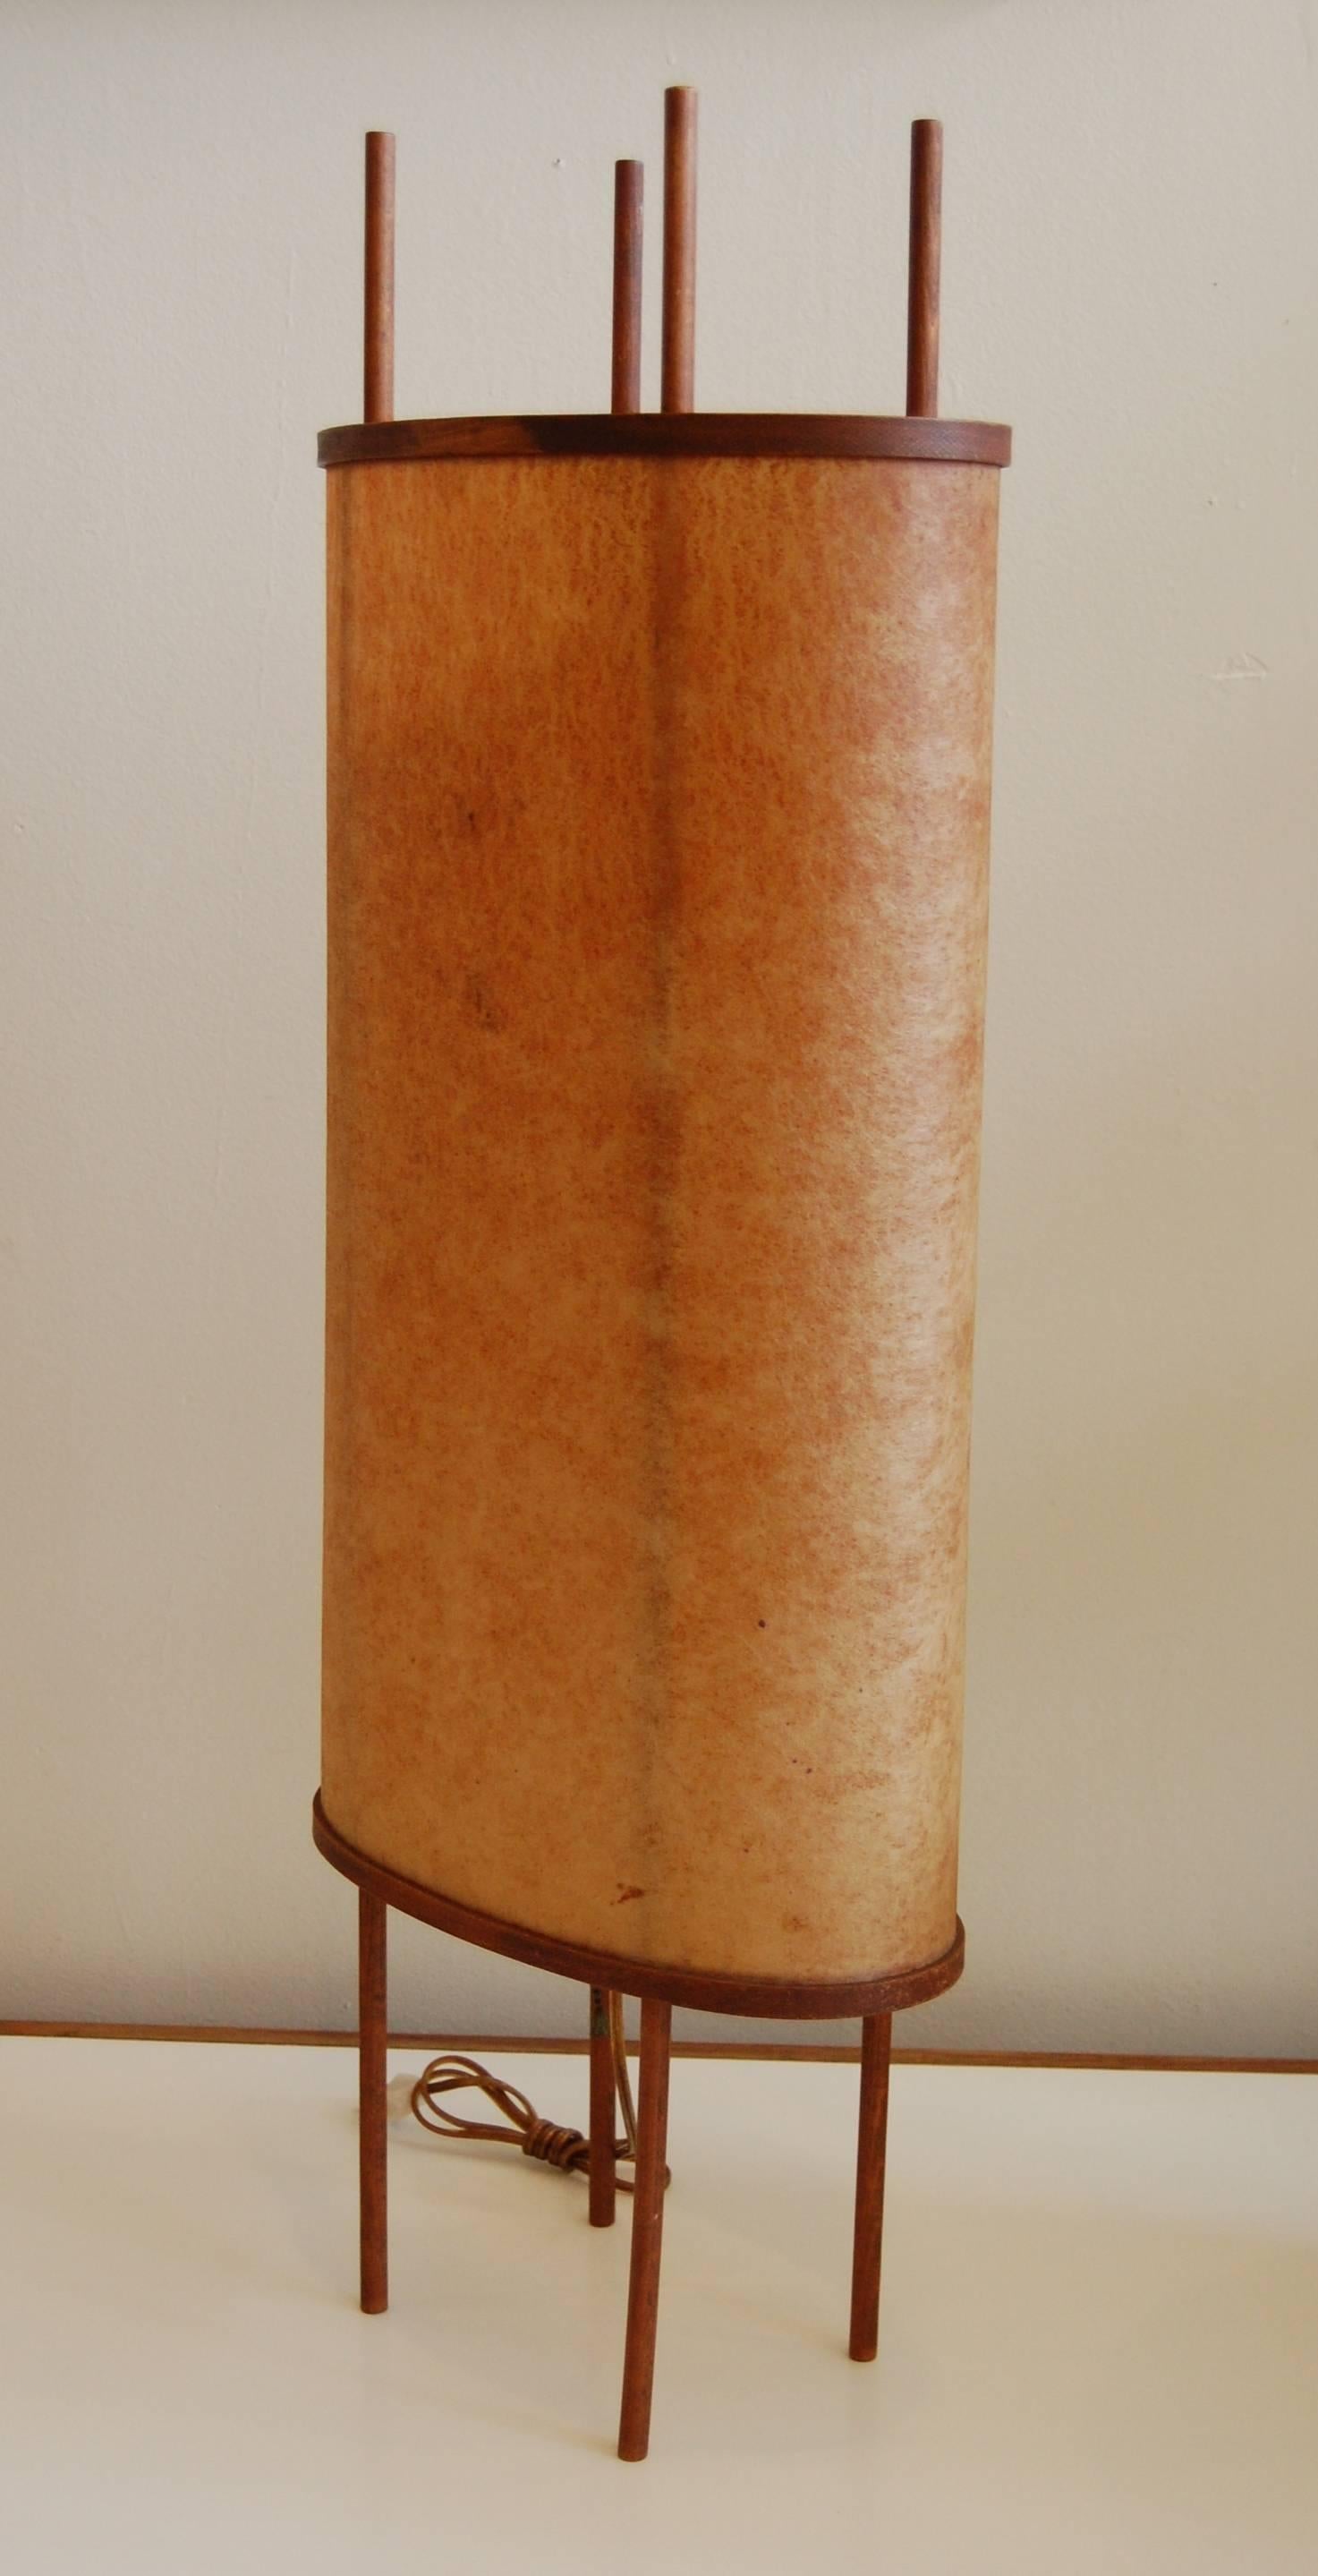 Four-legged Japanese table lamp, circa mid-late 1950s. An all original condition piece with a earthen colored parchment shade attached via steamed bentwood frames to four spindle legs. An interesting design with a high level of construction.